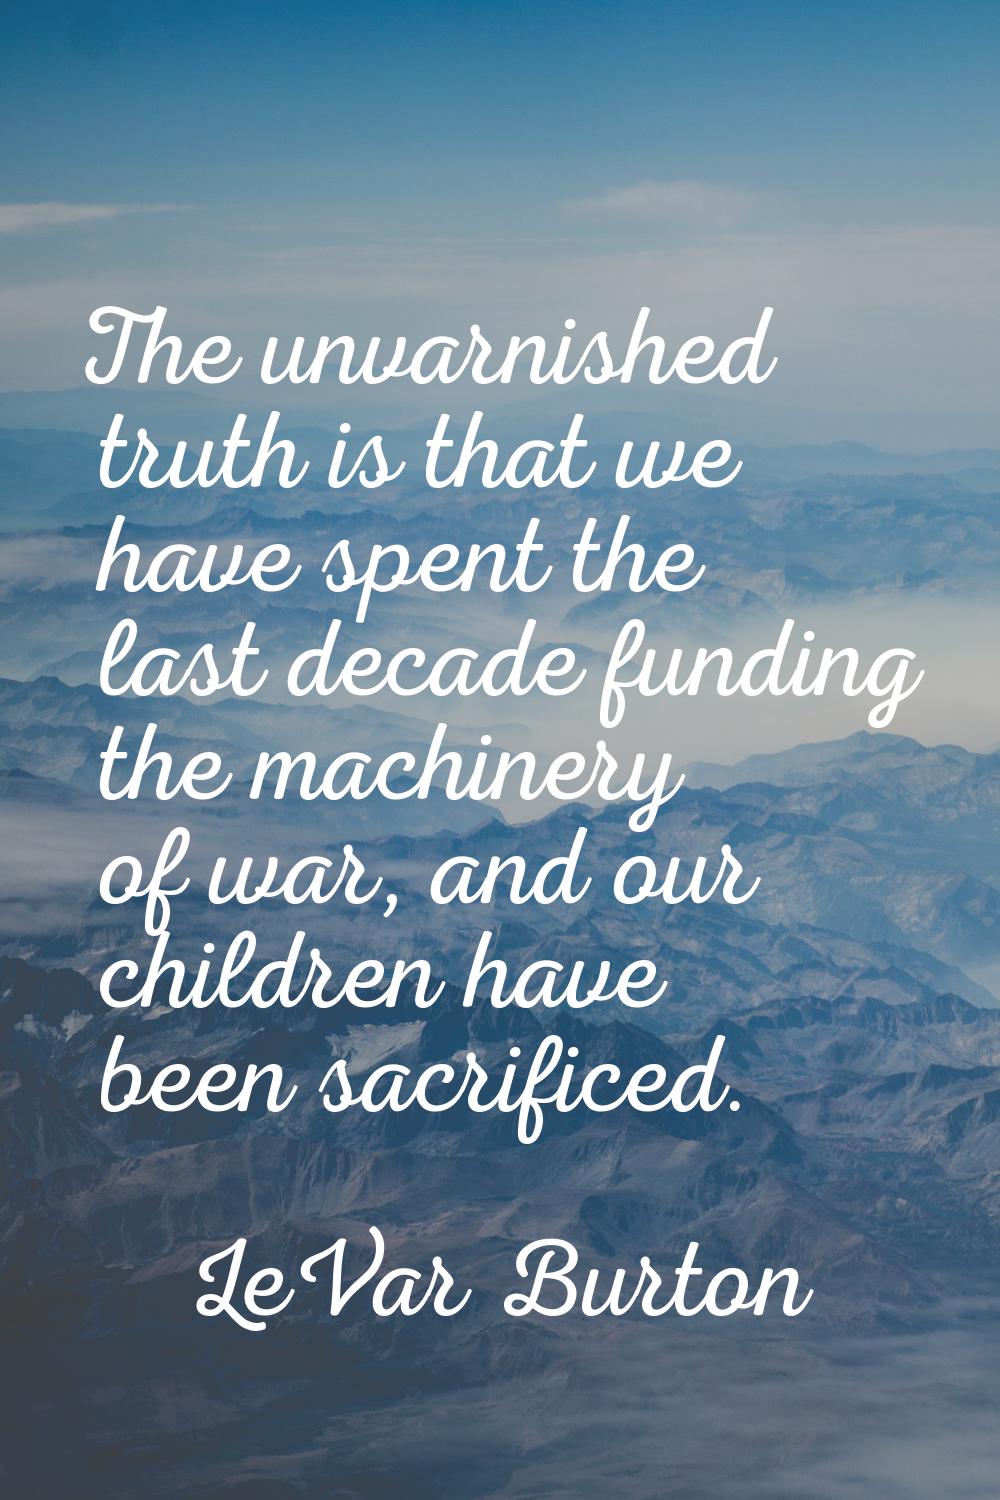 The unvarnished truth is that we have spent the last decade funding the machinery of war, and our c